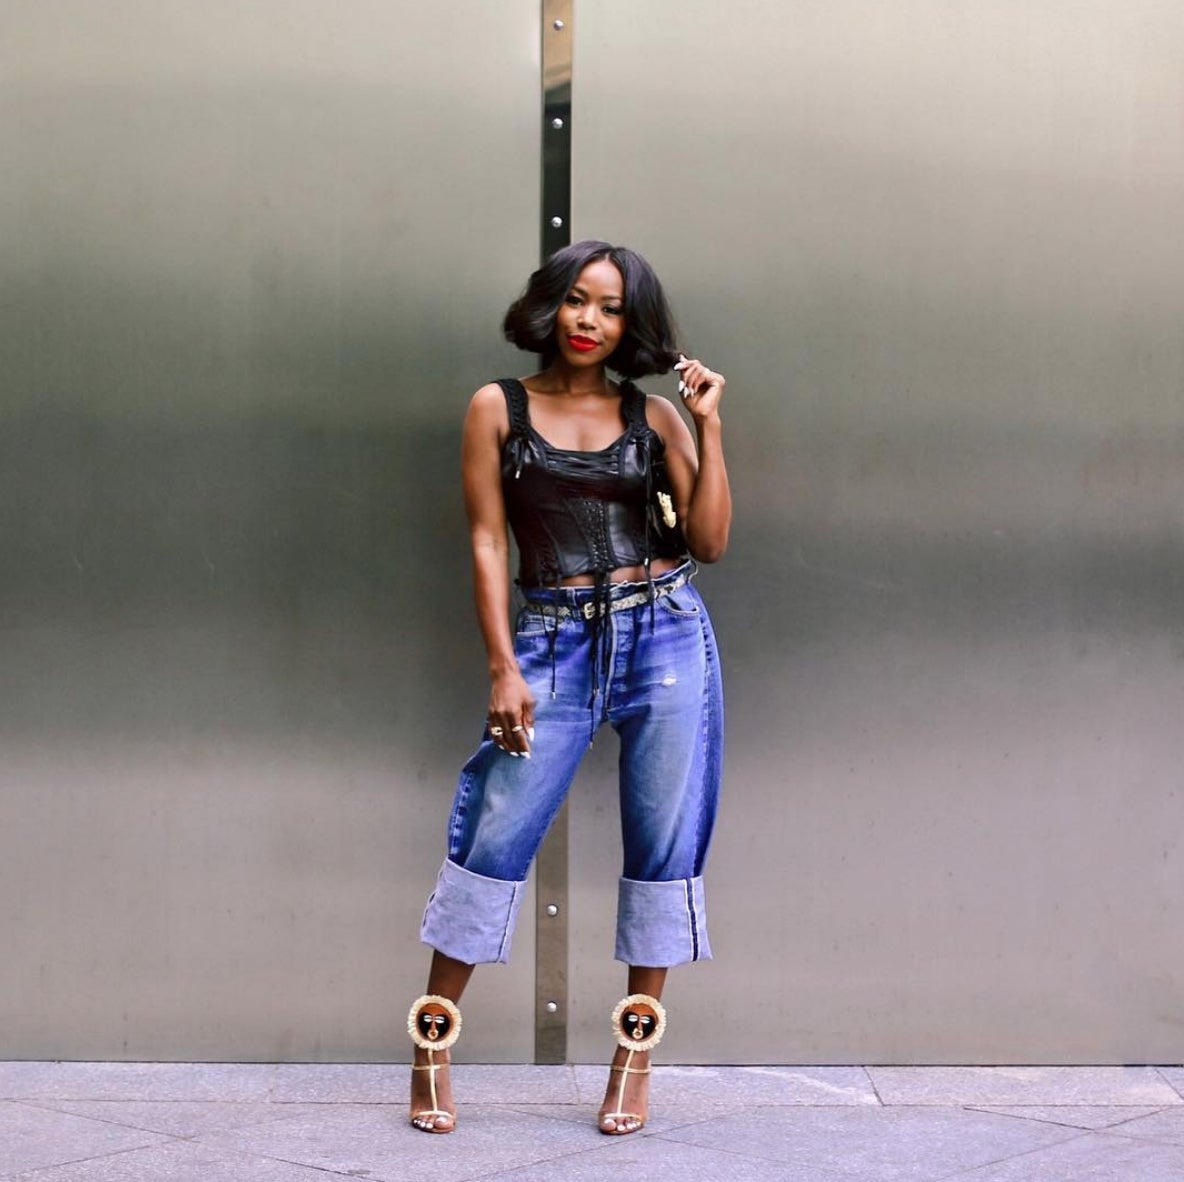 ESSENCE 25 Most Stylish: Kahlana Barfield Brown Is A Fabulous Young Style Icon Sprinkling Black Girl Magic Across The Globe